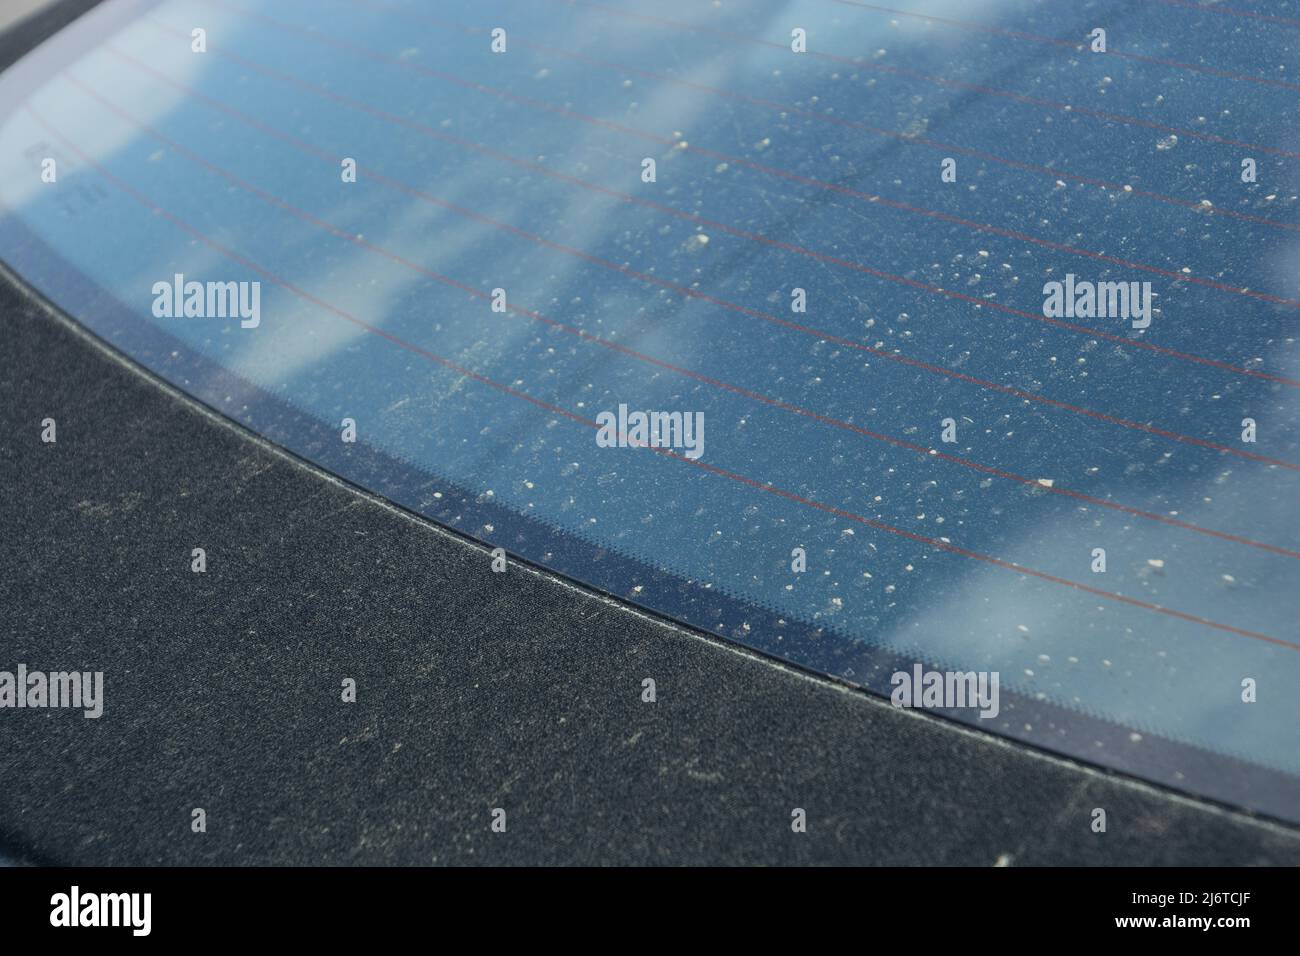 convertible fabric roof of a modern car soiled with pollen Stock Photo